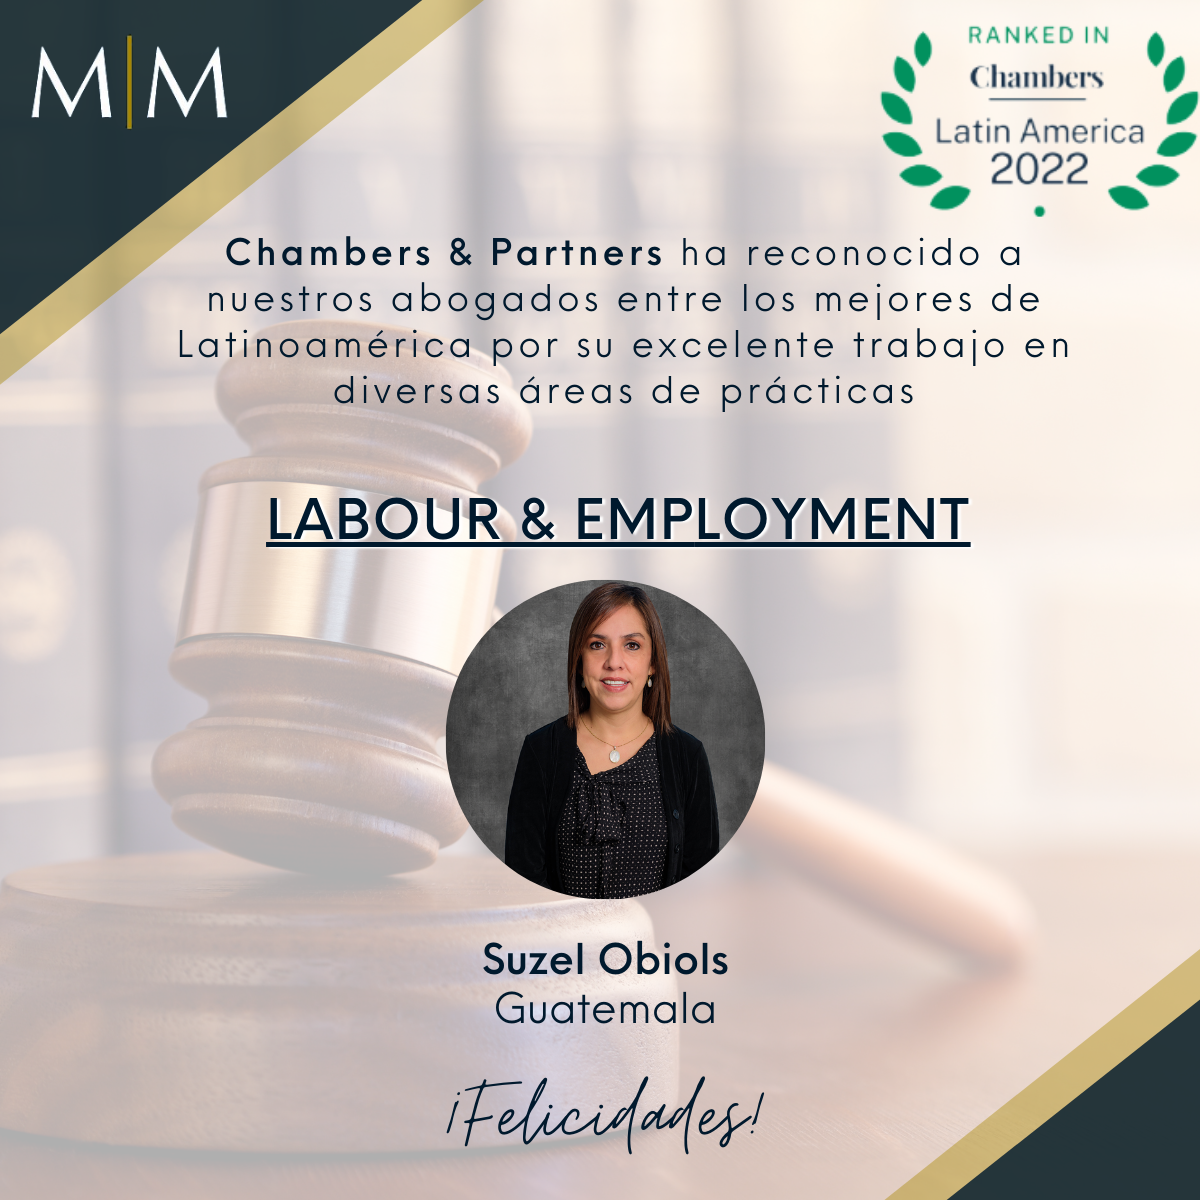 You are currently viewing M&M Reconocimiento- Chambers & Partners “Labour & Employment”